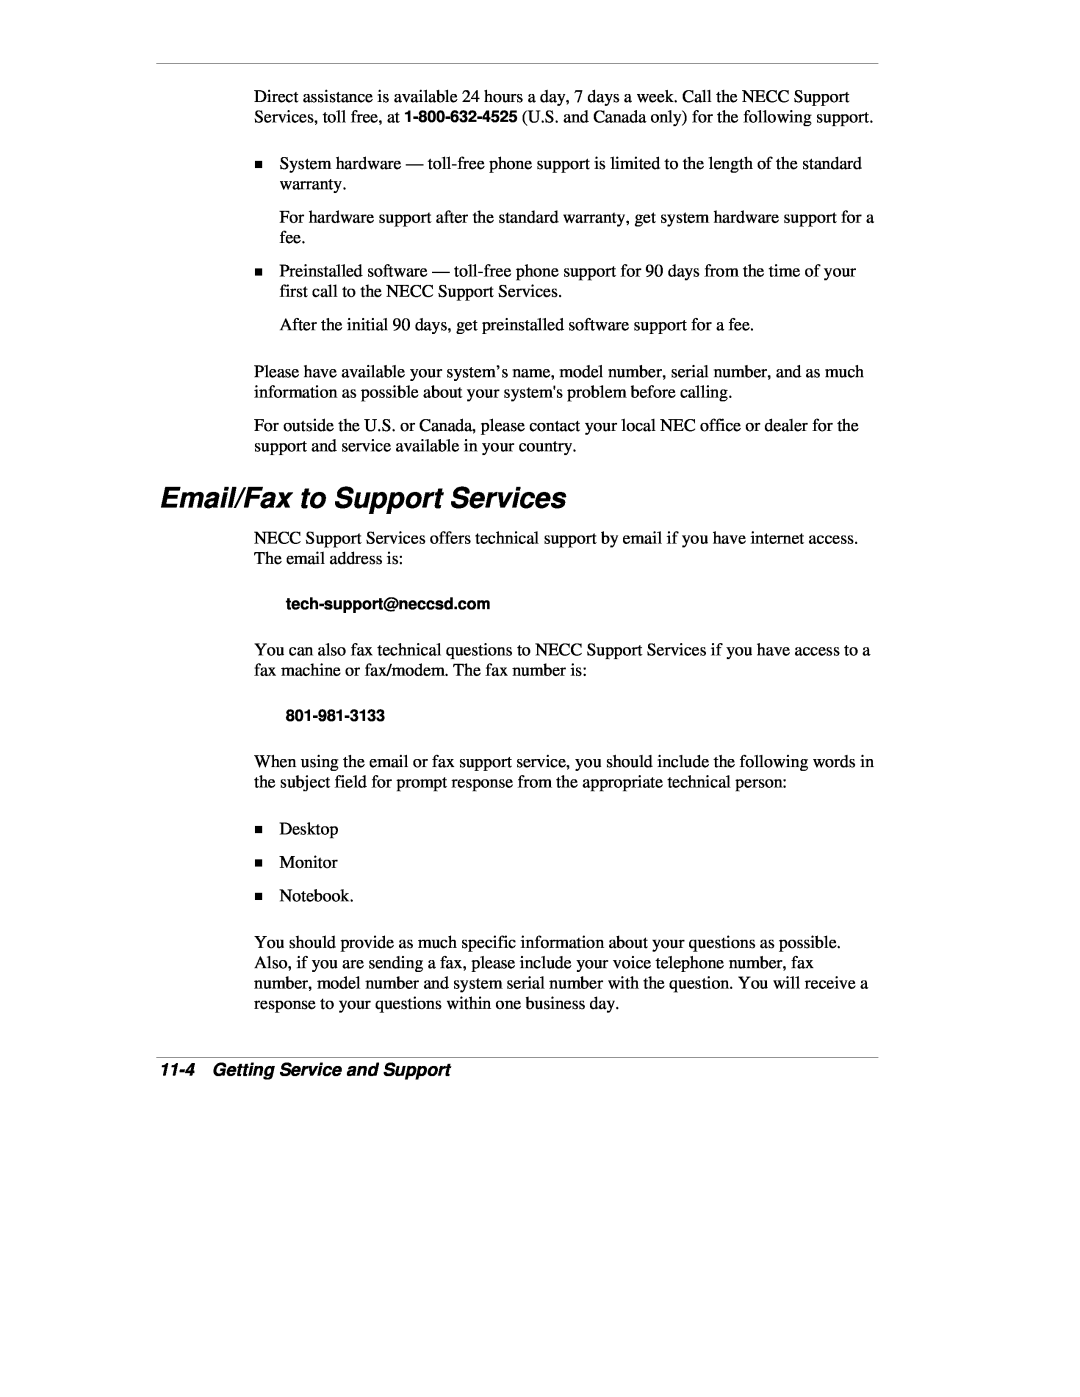 NEC VX manual Email/Fax to Support Services, Getting Service and Support 